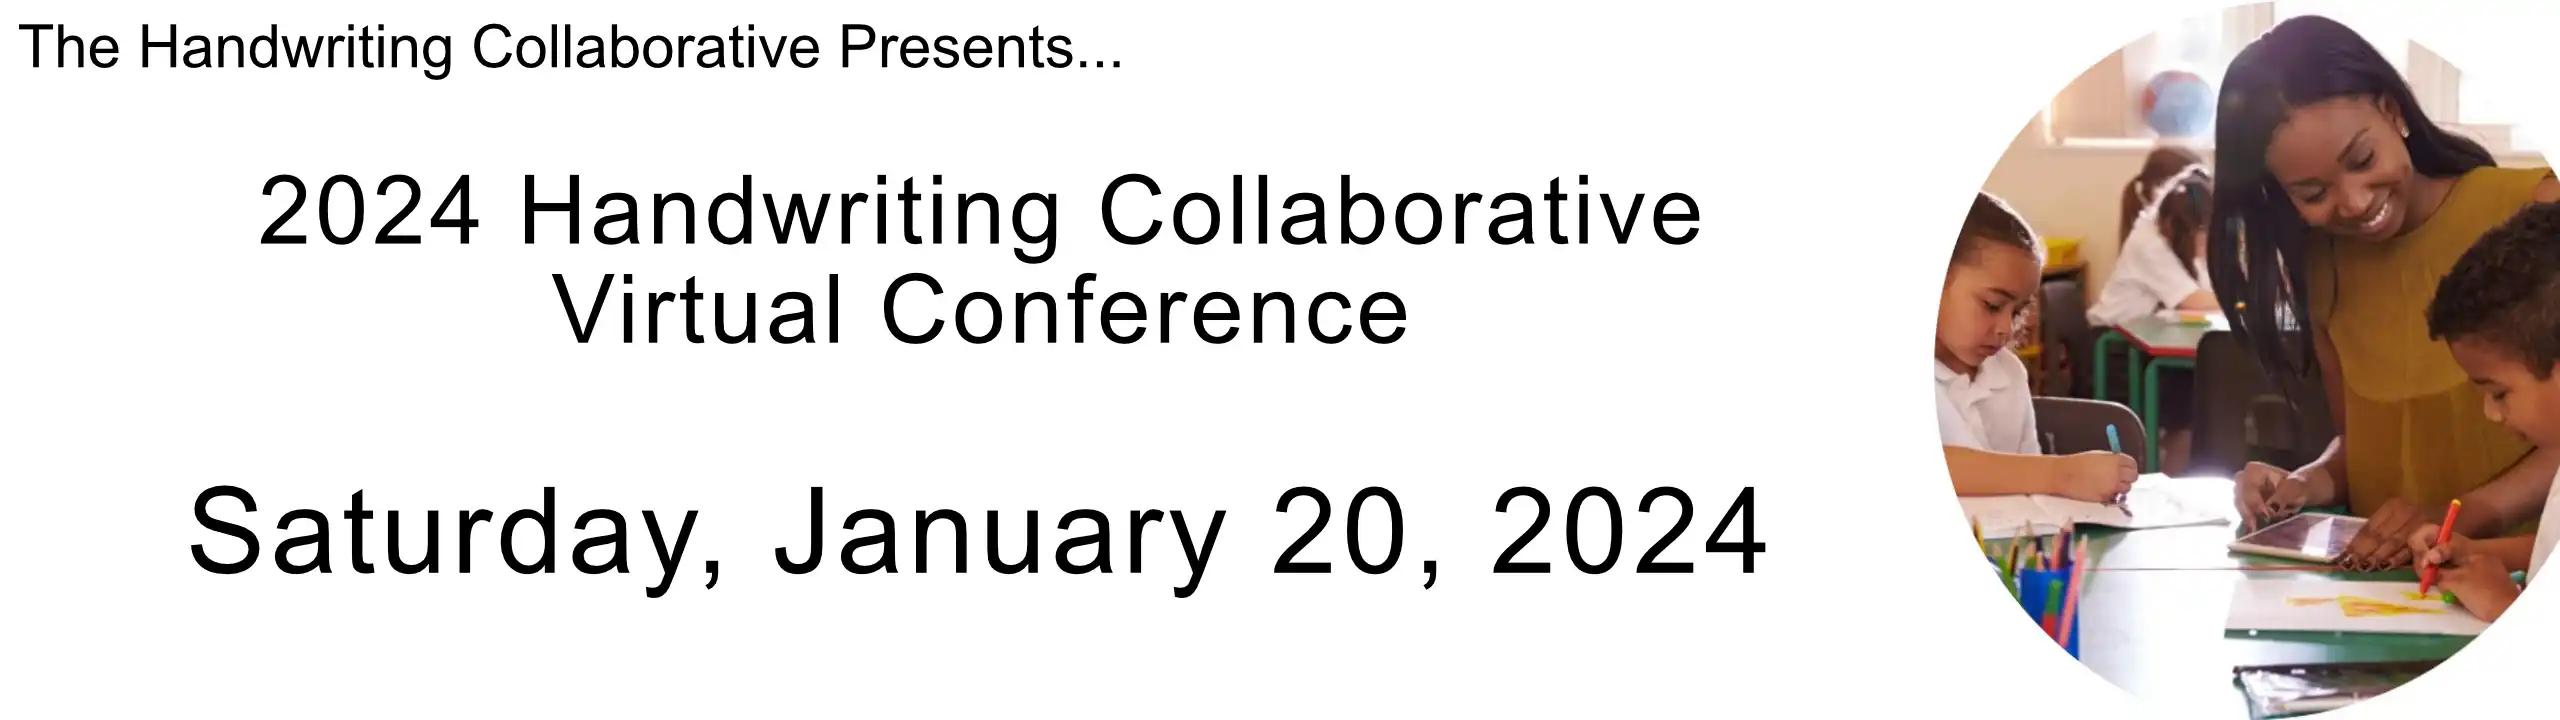 The 2024 Handwriting Collaborative Conference Banner